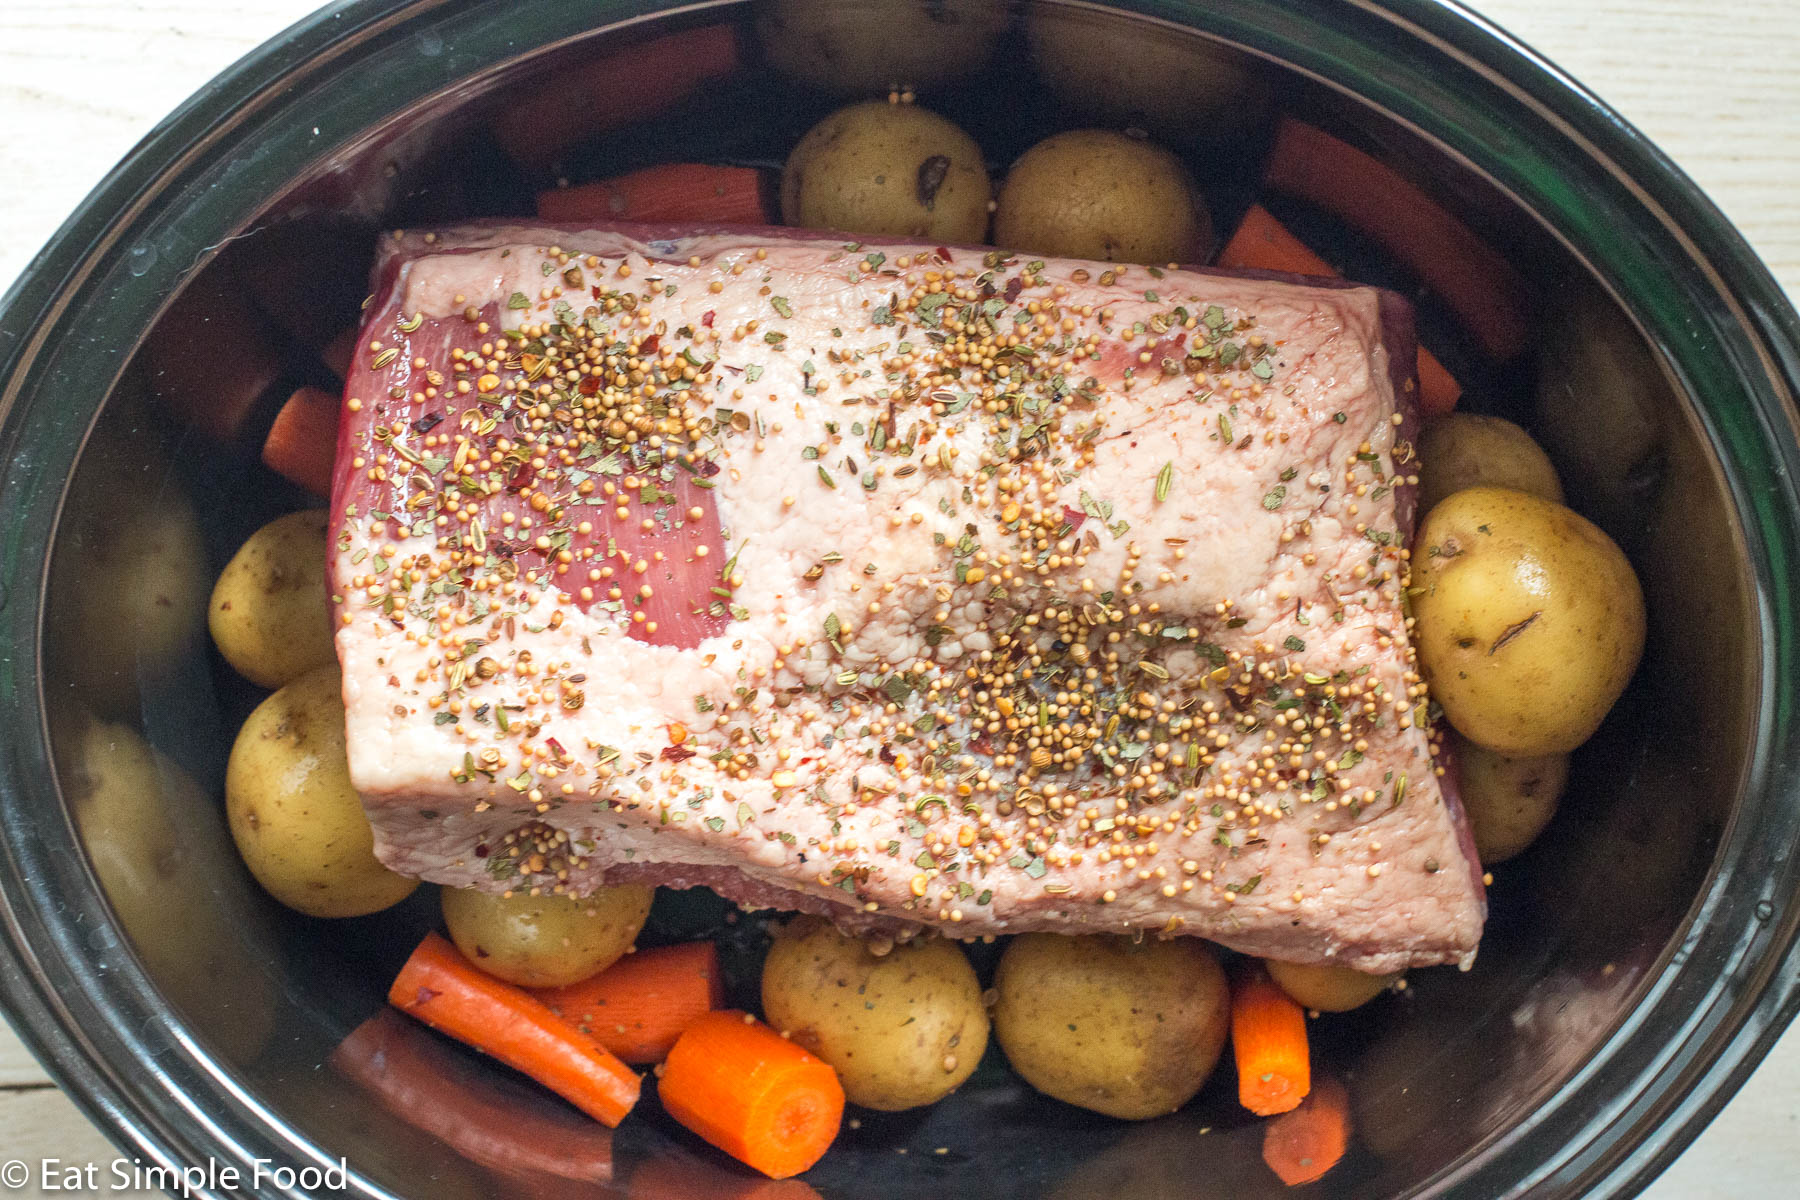 Top down view of a raw fat side up beef brisket with spices in a crockpot sitting on top of baby potatoes and chunks of carrots.